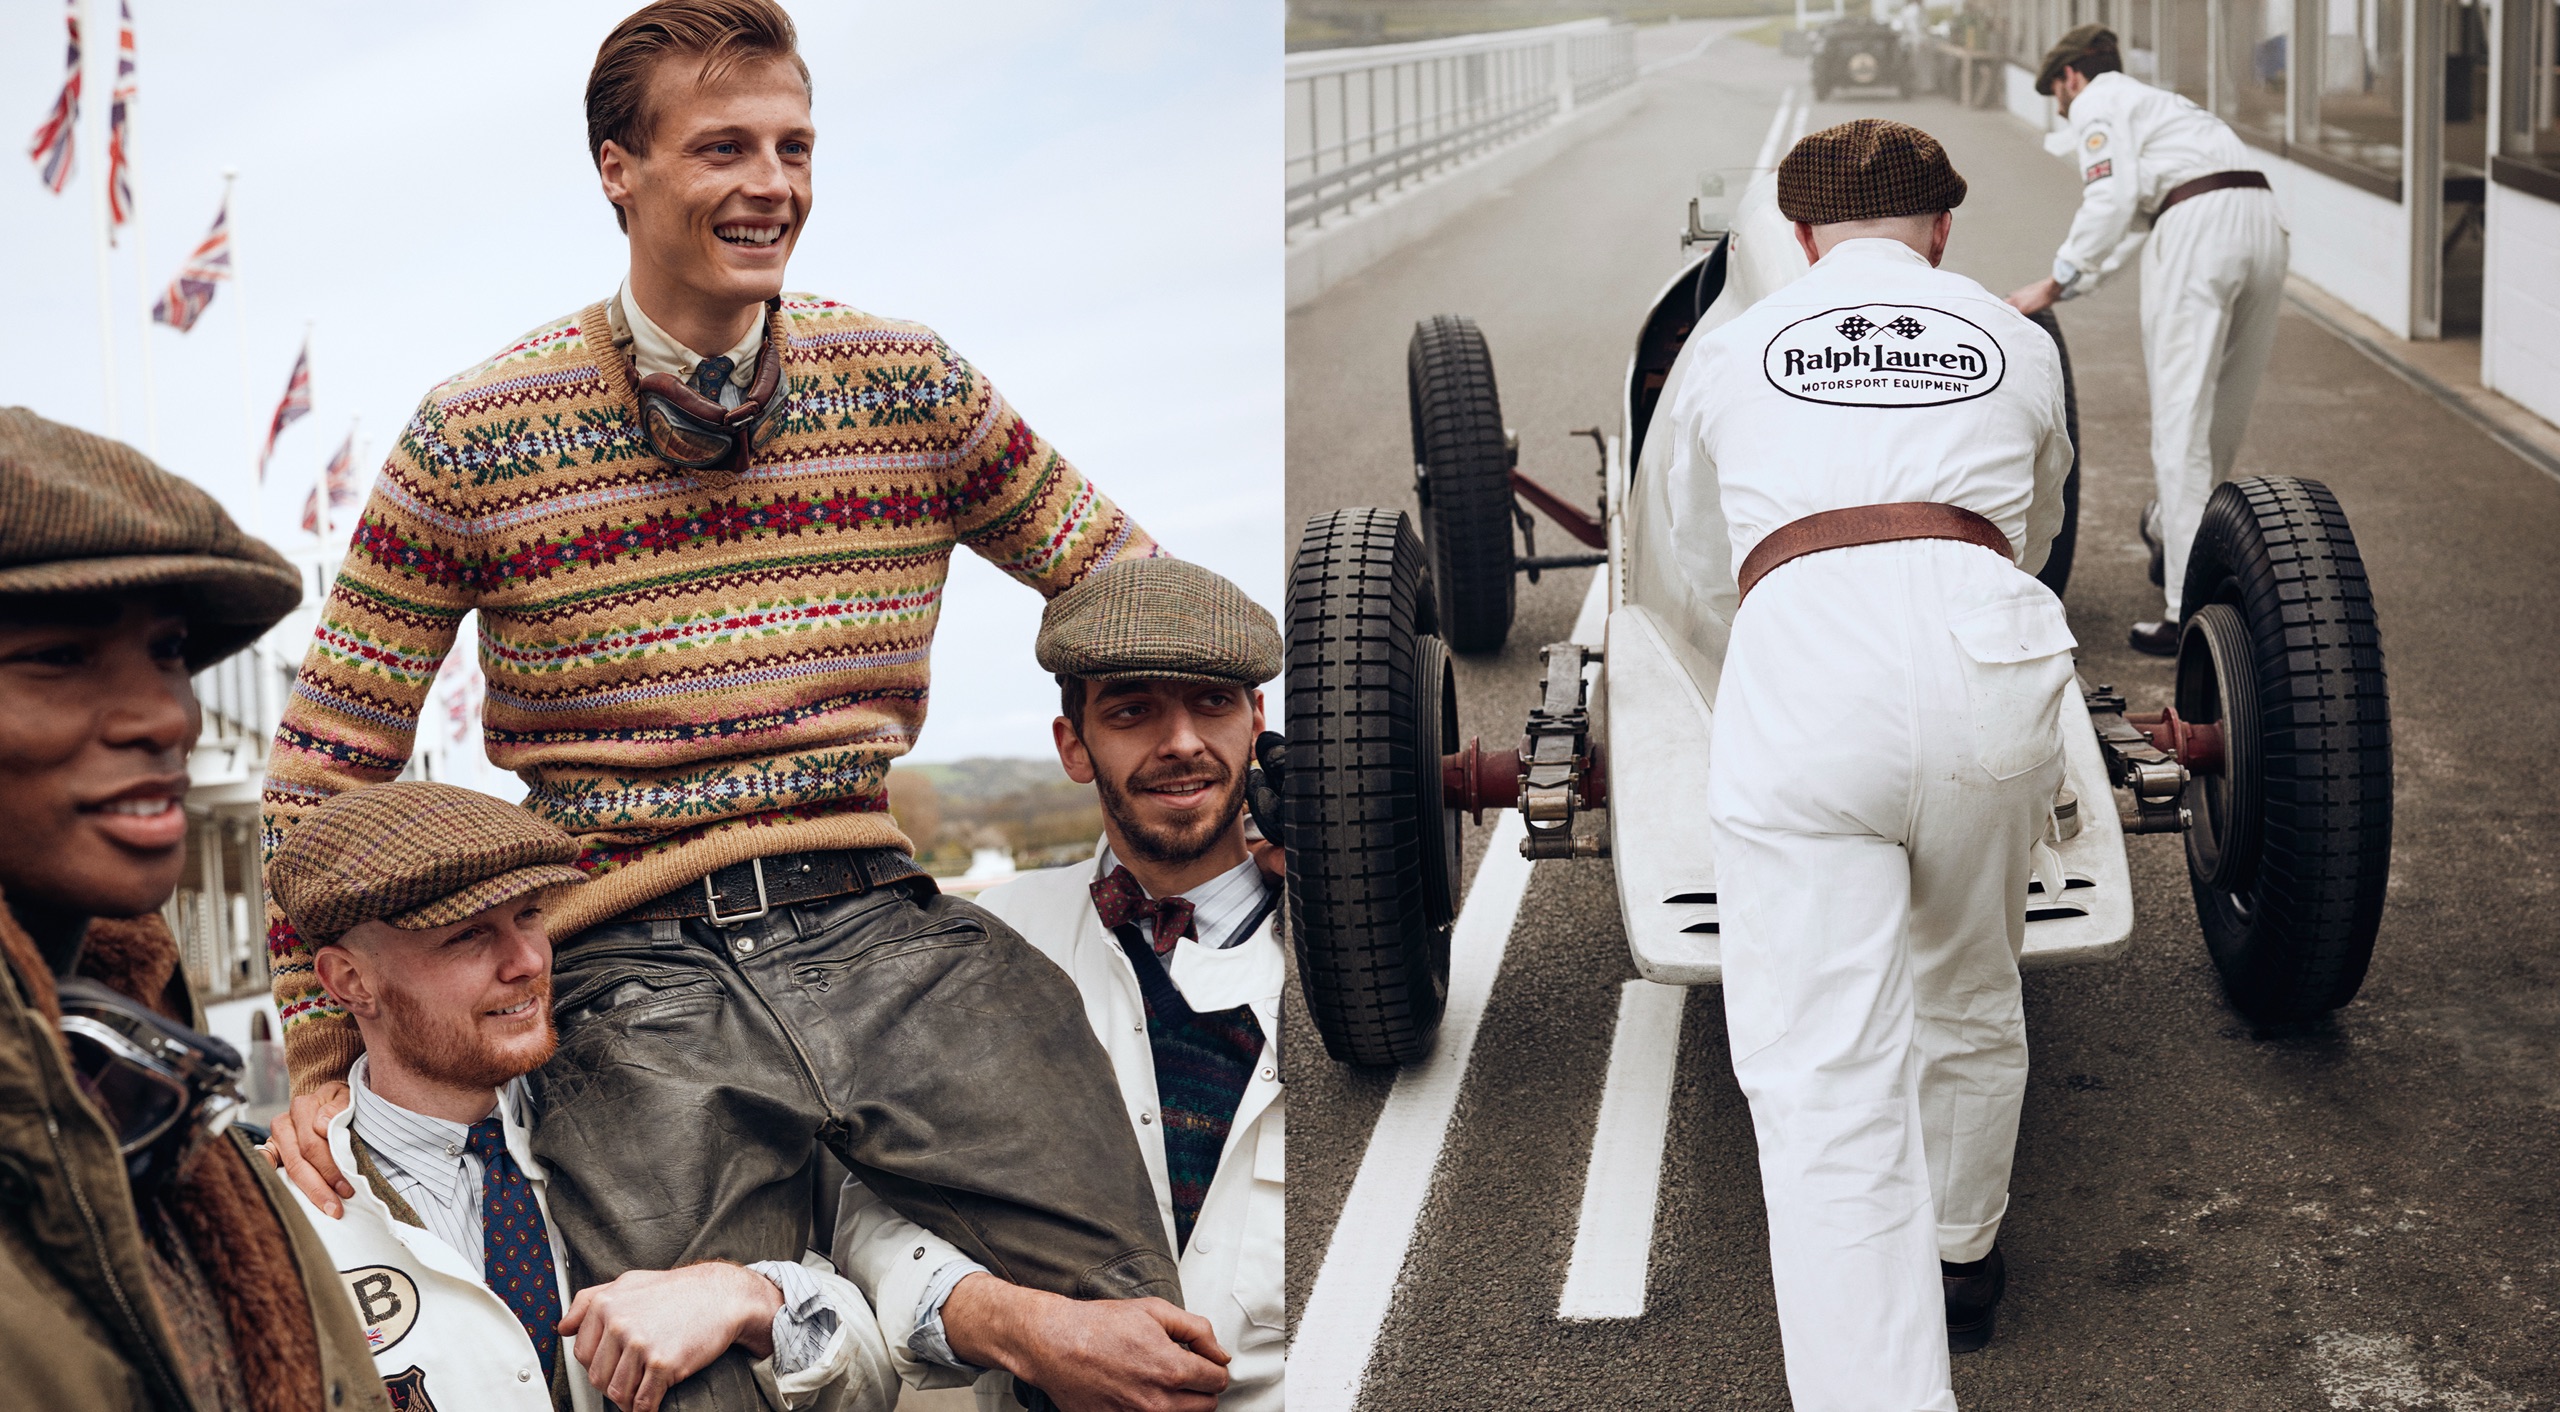 <strong>ON LOCATION</strong><br/><span>This season of Polo Originals, inspired by the golden era of Grand Prix car racing, was photographed at the Goodwood Motor Circuit, which is located in West Sussex, on the 12,000-acre Goodwood Estate. The Circuit has since become known for hosting a number of prestigious motorsport events, including the famous Festival of Speed and Revival.</span> <br/><rlmag_link href="https://www.ralphlauren.global/br/en/search?cgid=brands-prl-tough-and-refined-cg"><button class="shop-collection">Shop the Story</button></rlmag_link>